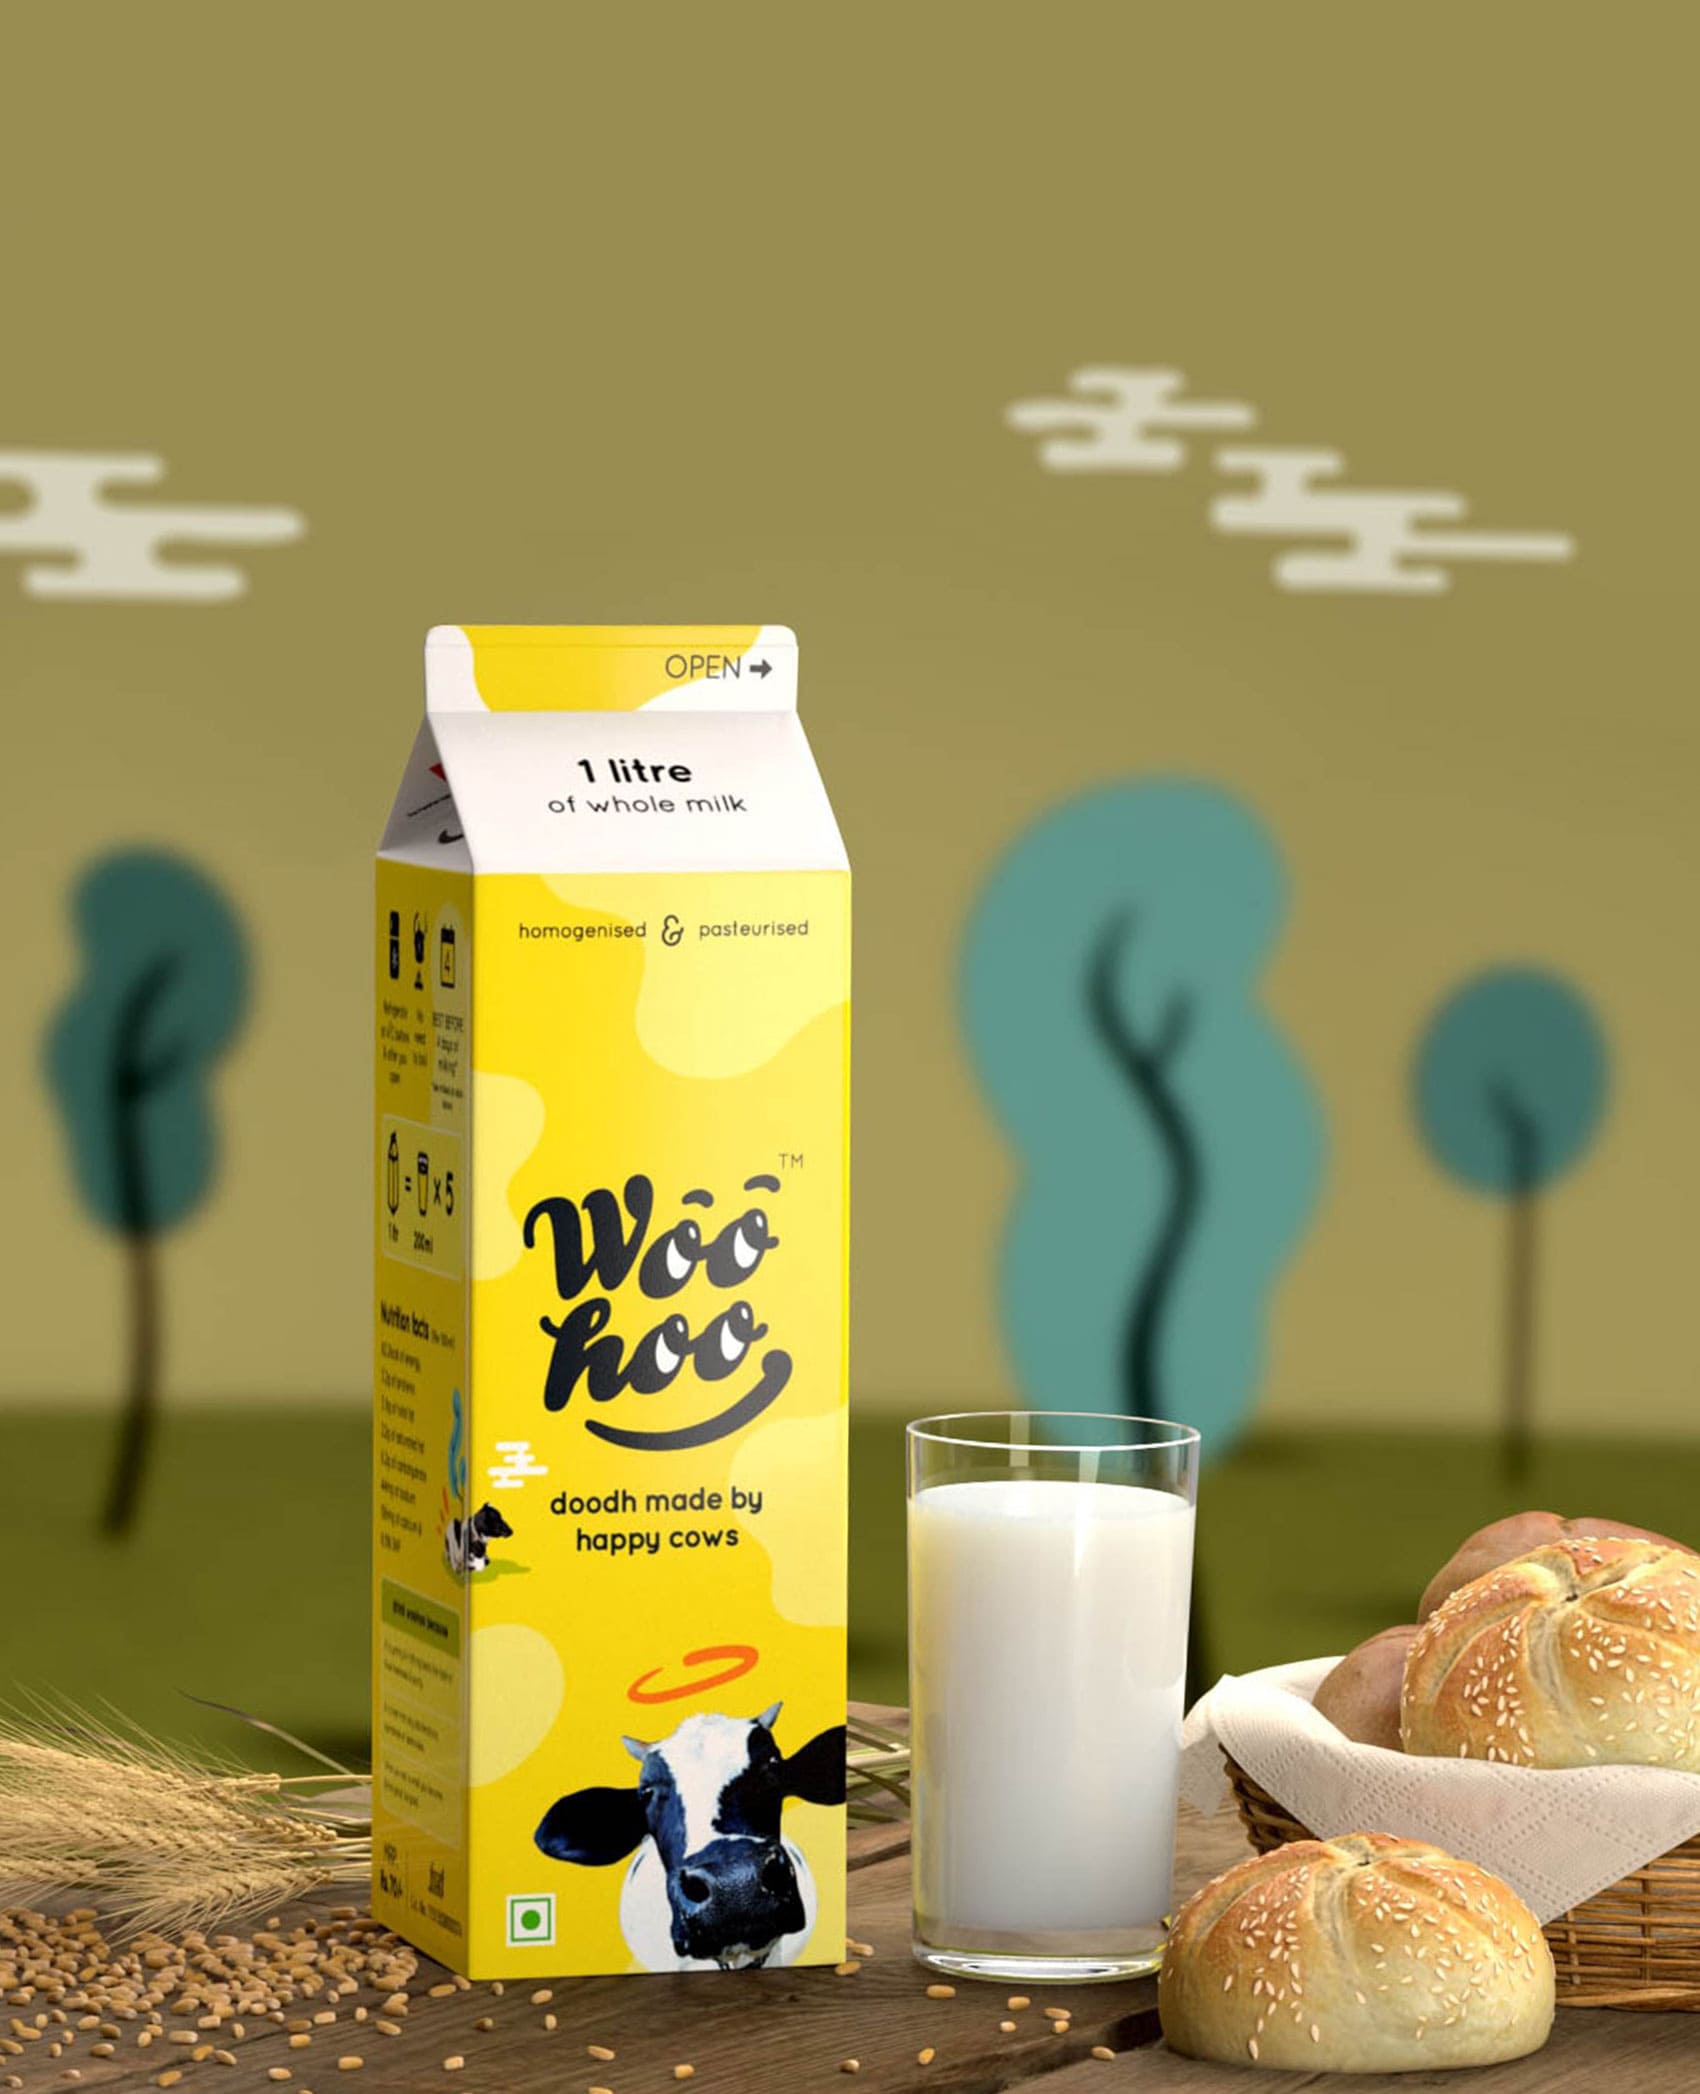 Changing the way we consume milk